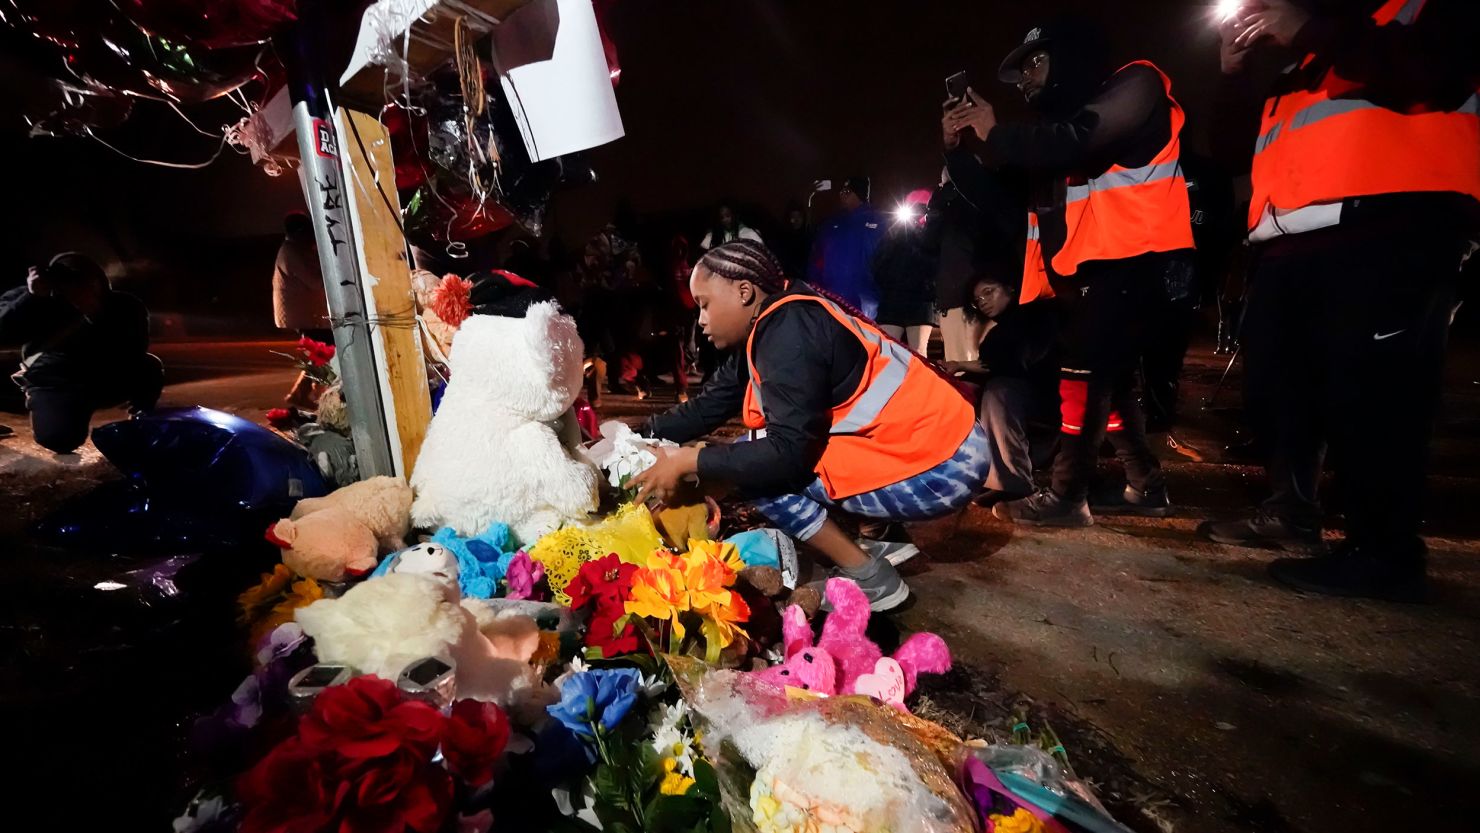 Sierra Rogers, who called Tyre Nichols her best friend, adjusts items in a memorial for the 29-year-old who was beaten by Memphis officers and later died.